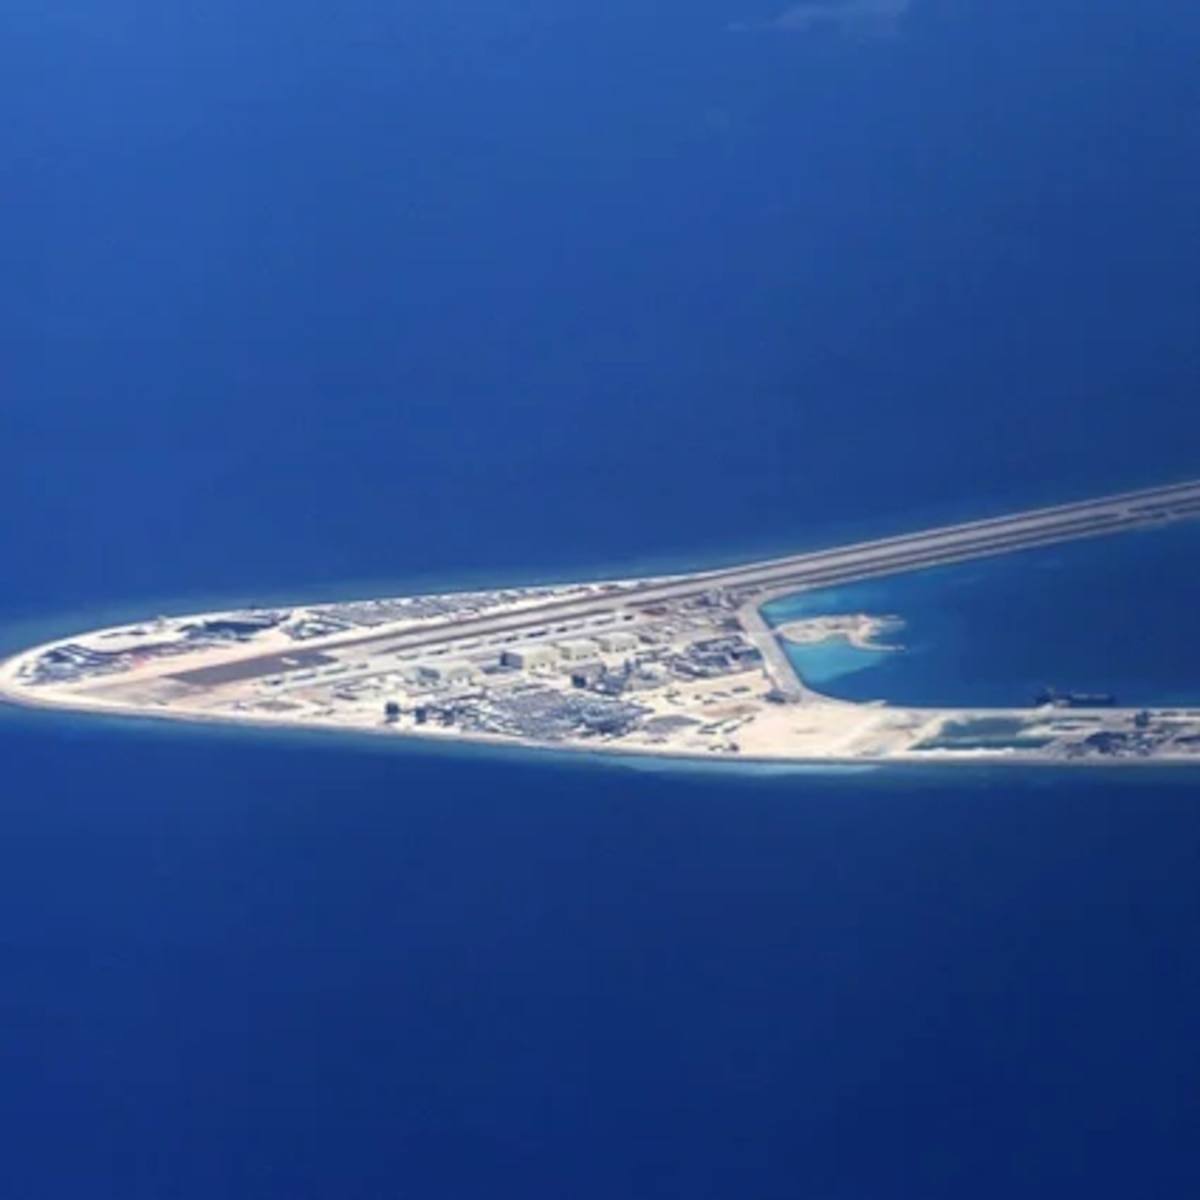 Militarized island in the South China Sea